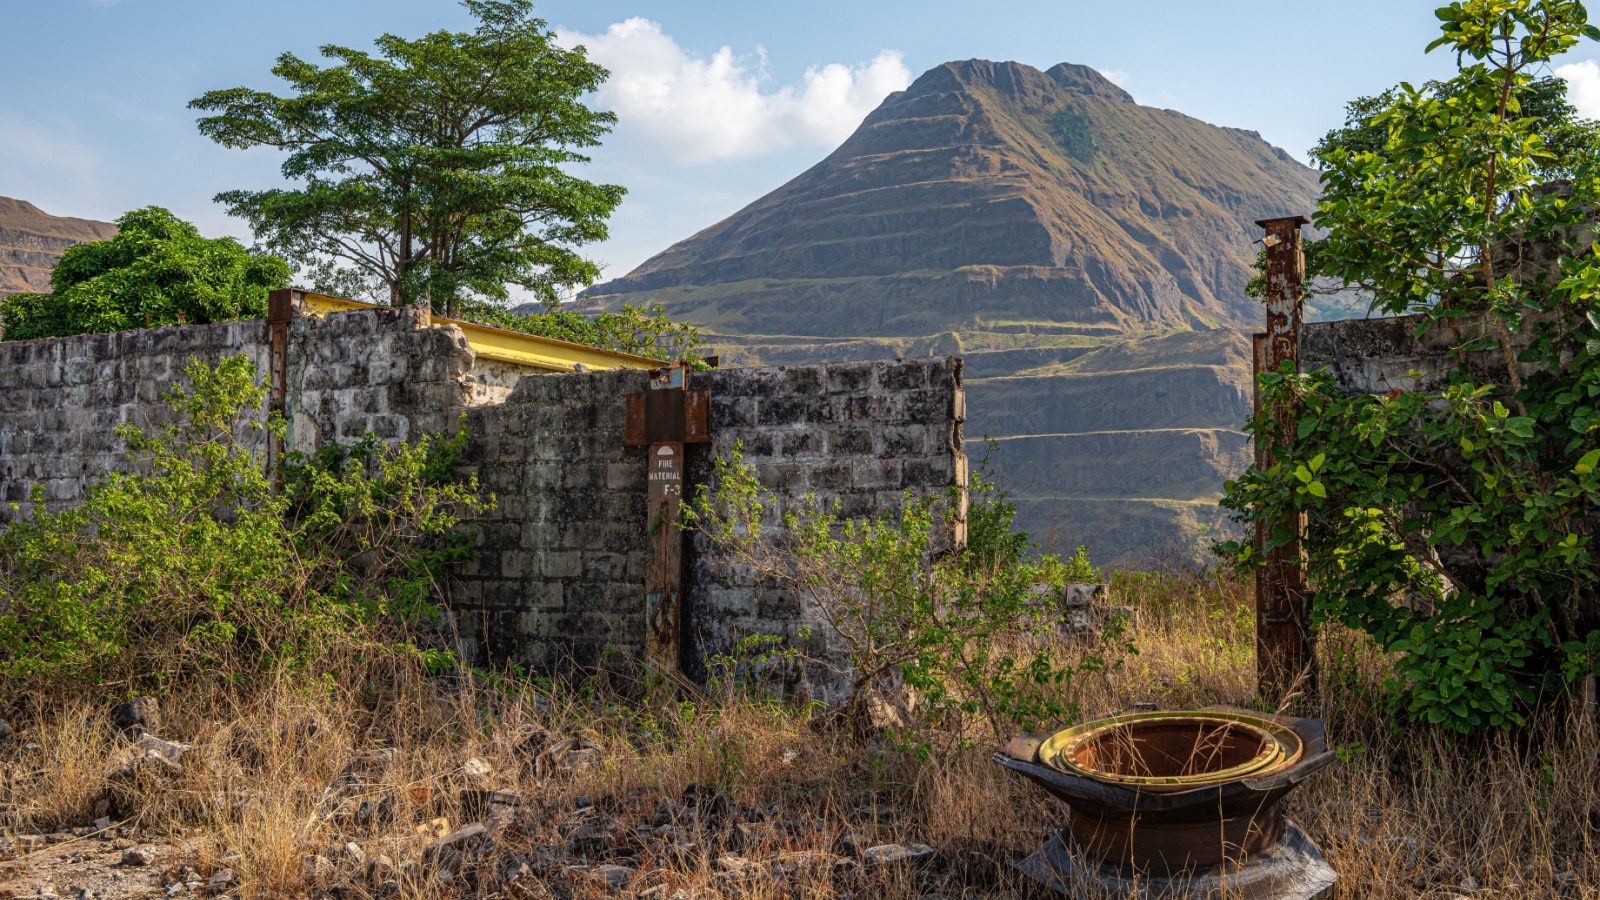 Mount Nimba, Liberia: an abandoned mining site and the highest point in West Africa. Hike to the top of the tallest peak in West Africa and the point where three countries converge